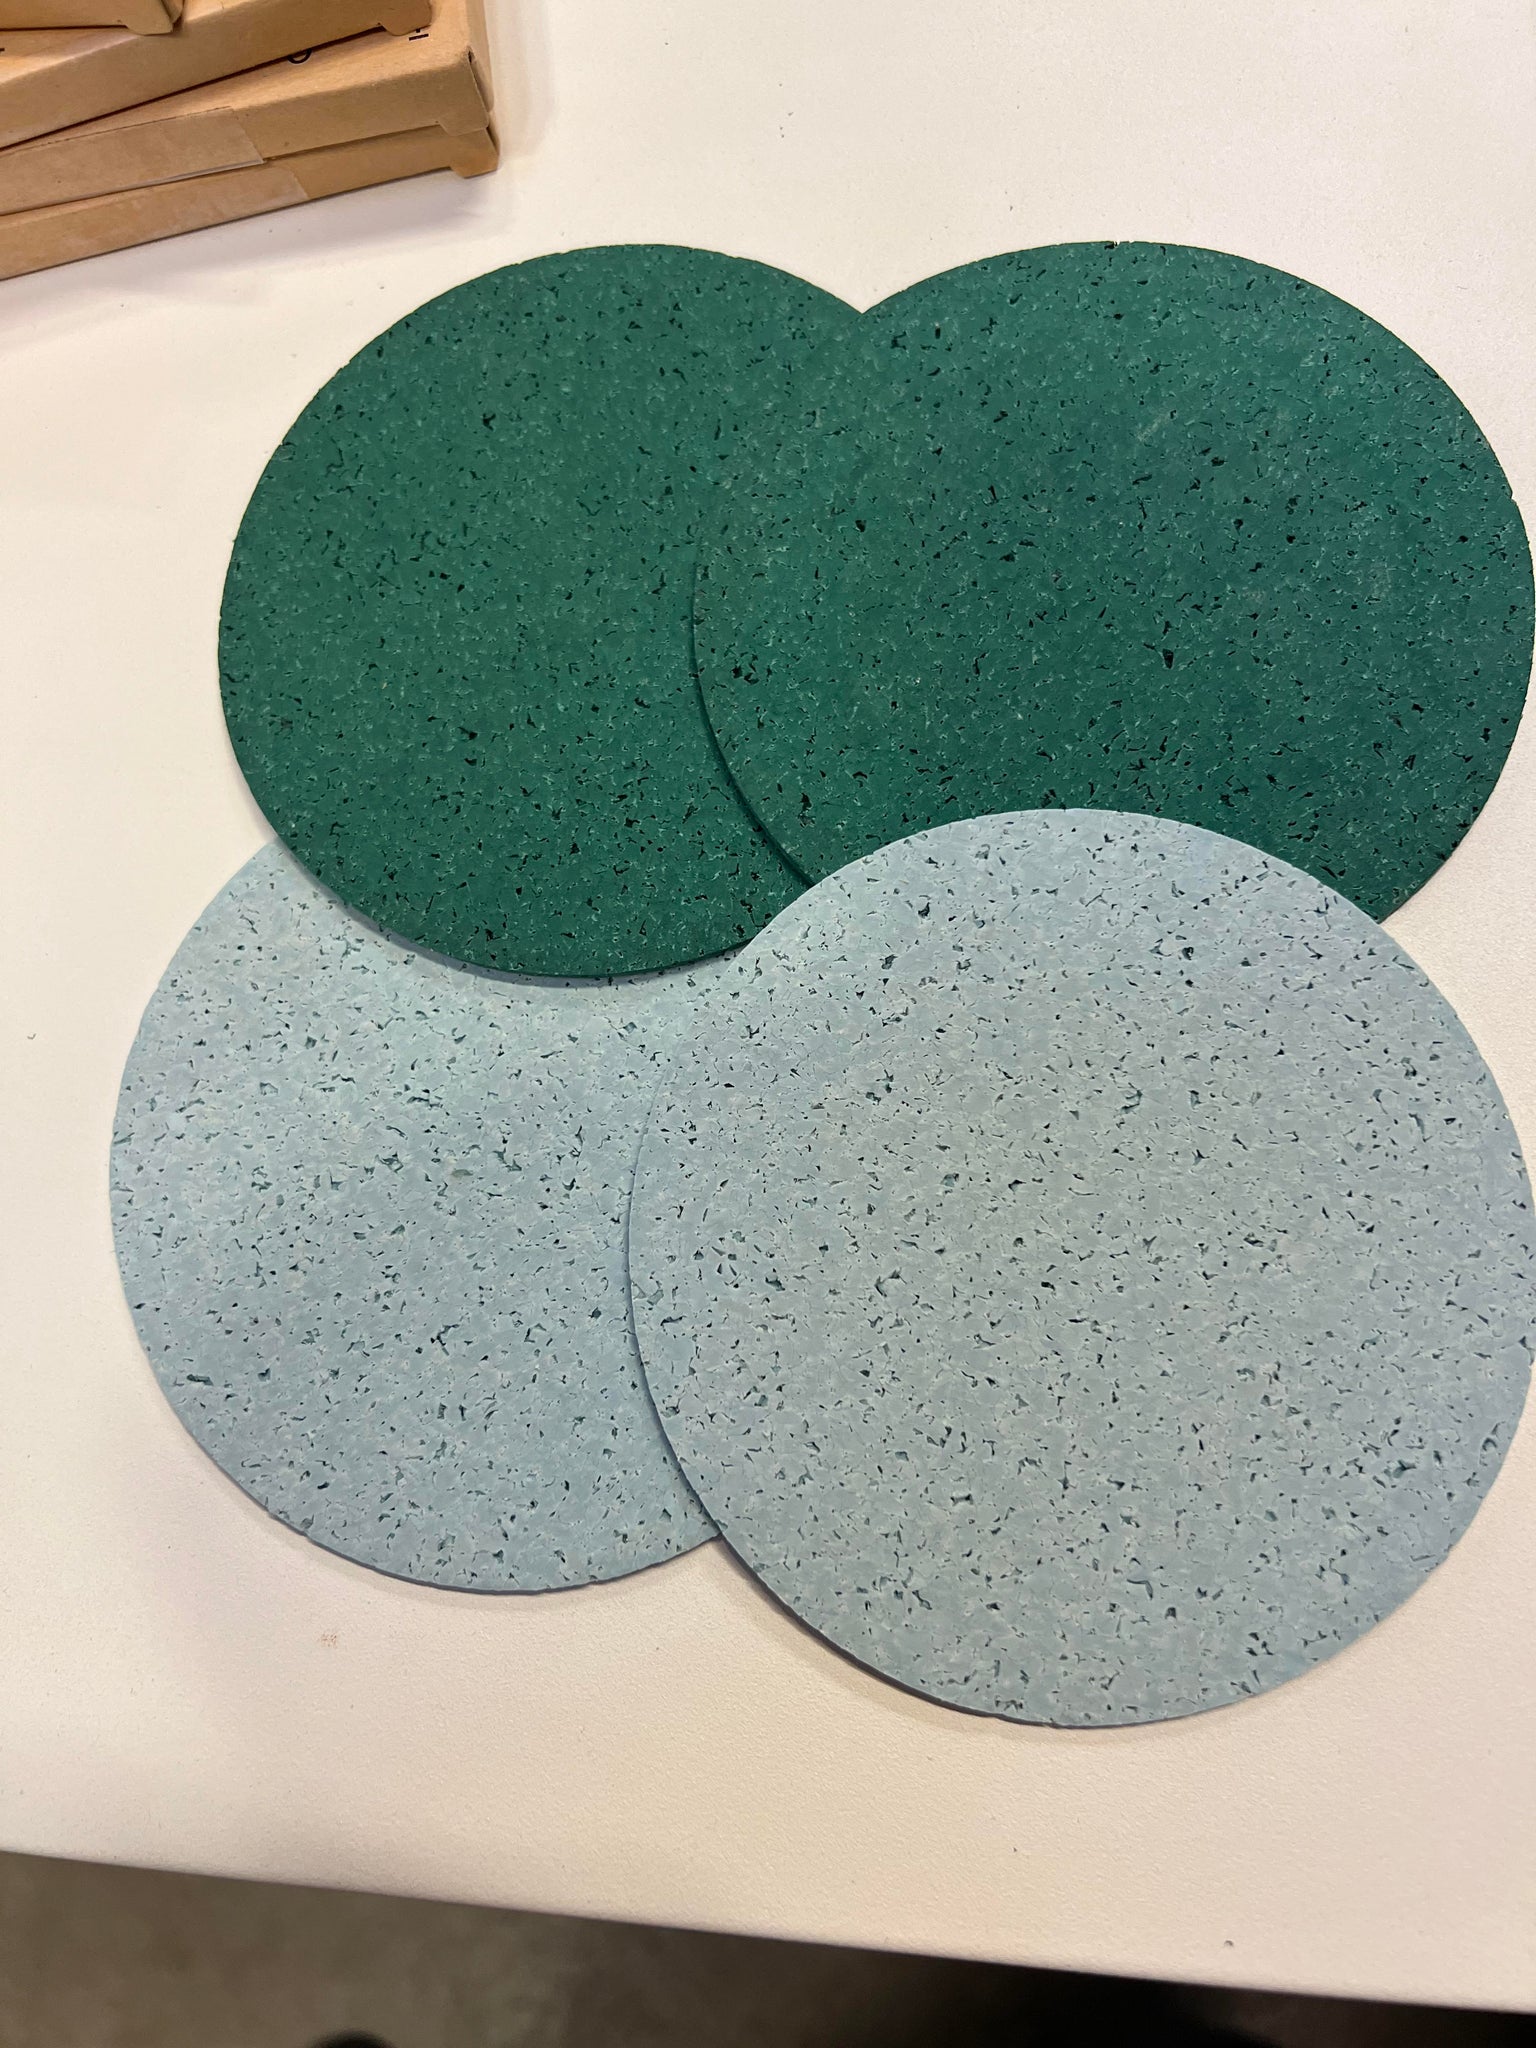 Two Toned Recycled Rubber Coasters by Tortuga